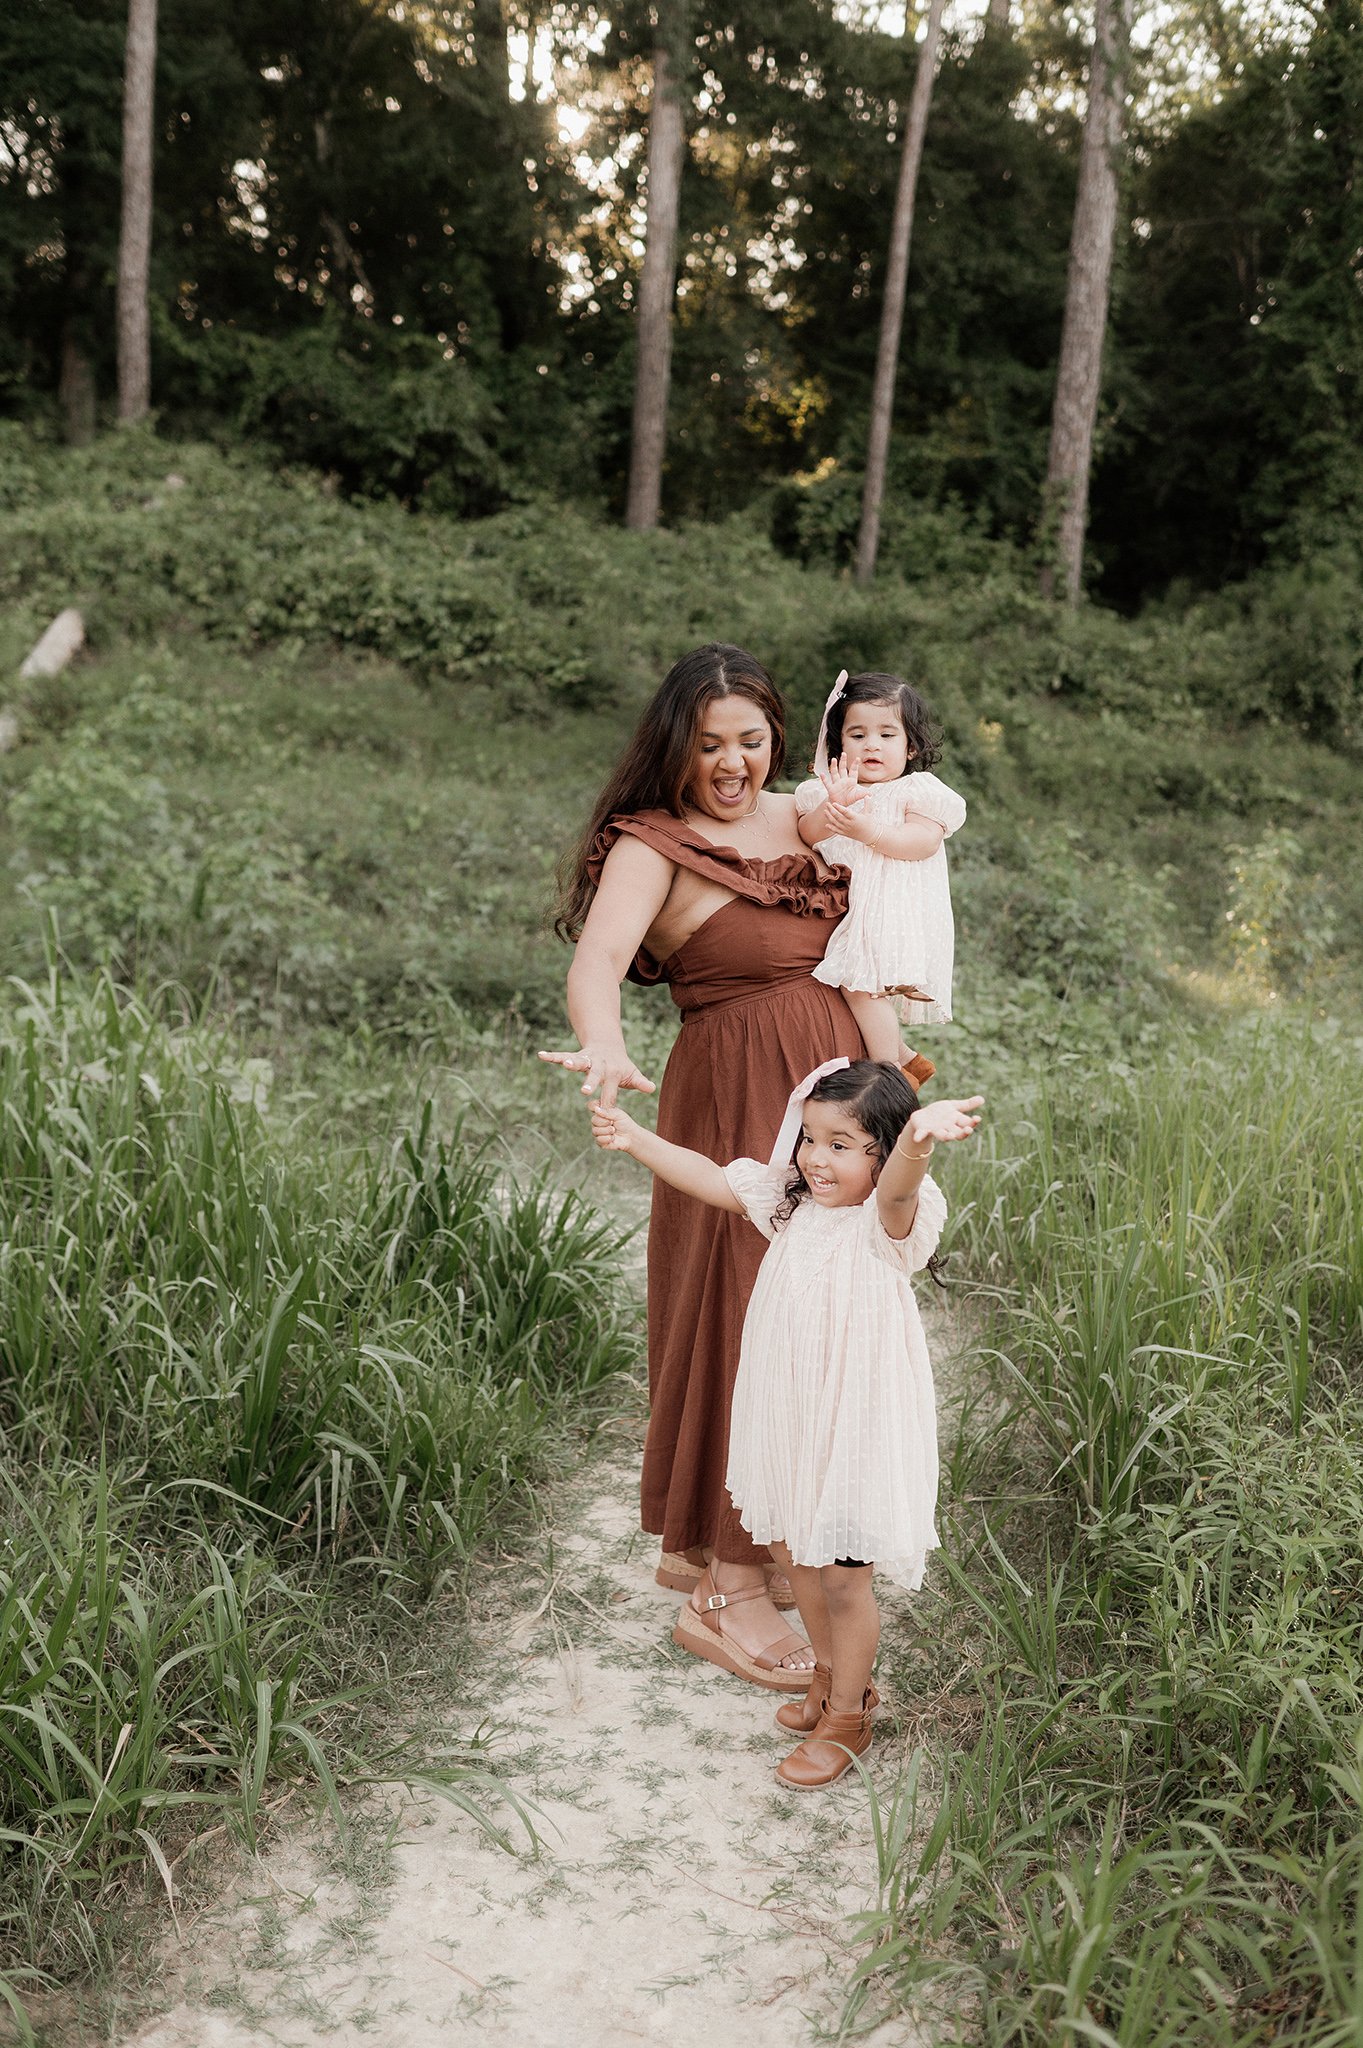 the woodlands family photographer _ conroe photographer _ houston family photographer _ ashley gillen photography _ texas family photographer _ conroe wedding photographer _ conroe texas _ cshi14.jpg